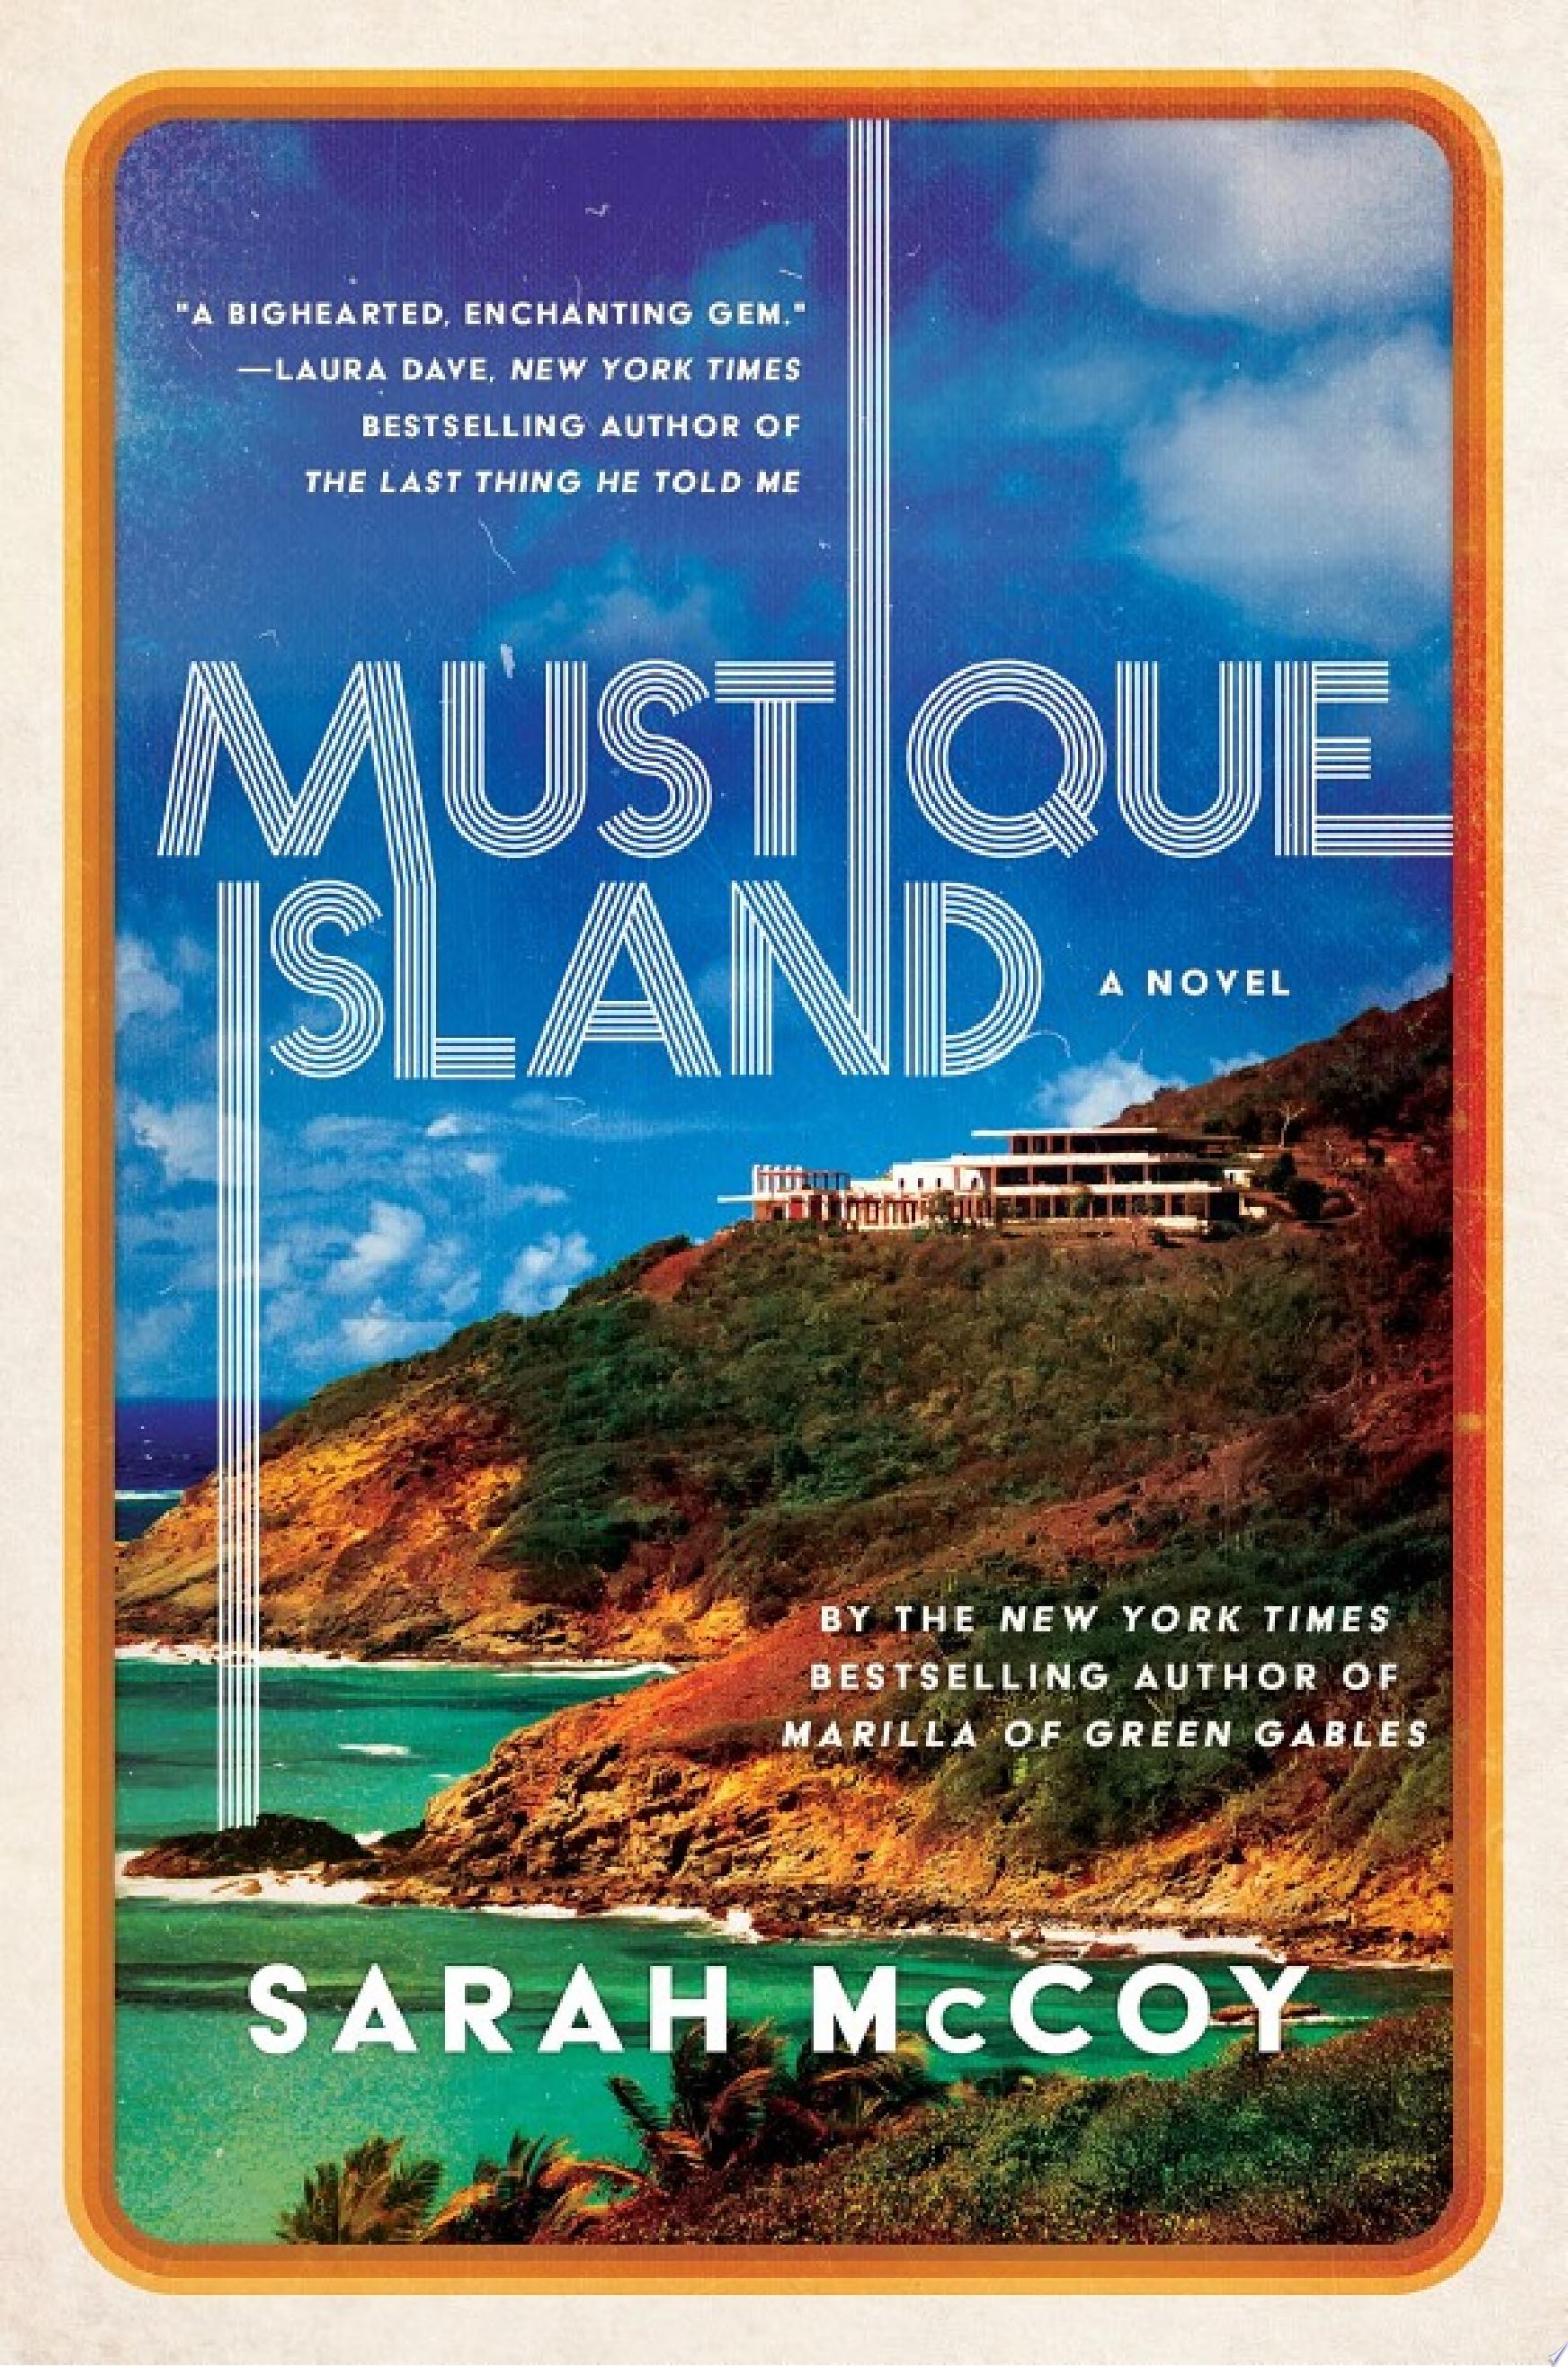 Image for "Mustique Island"